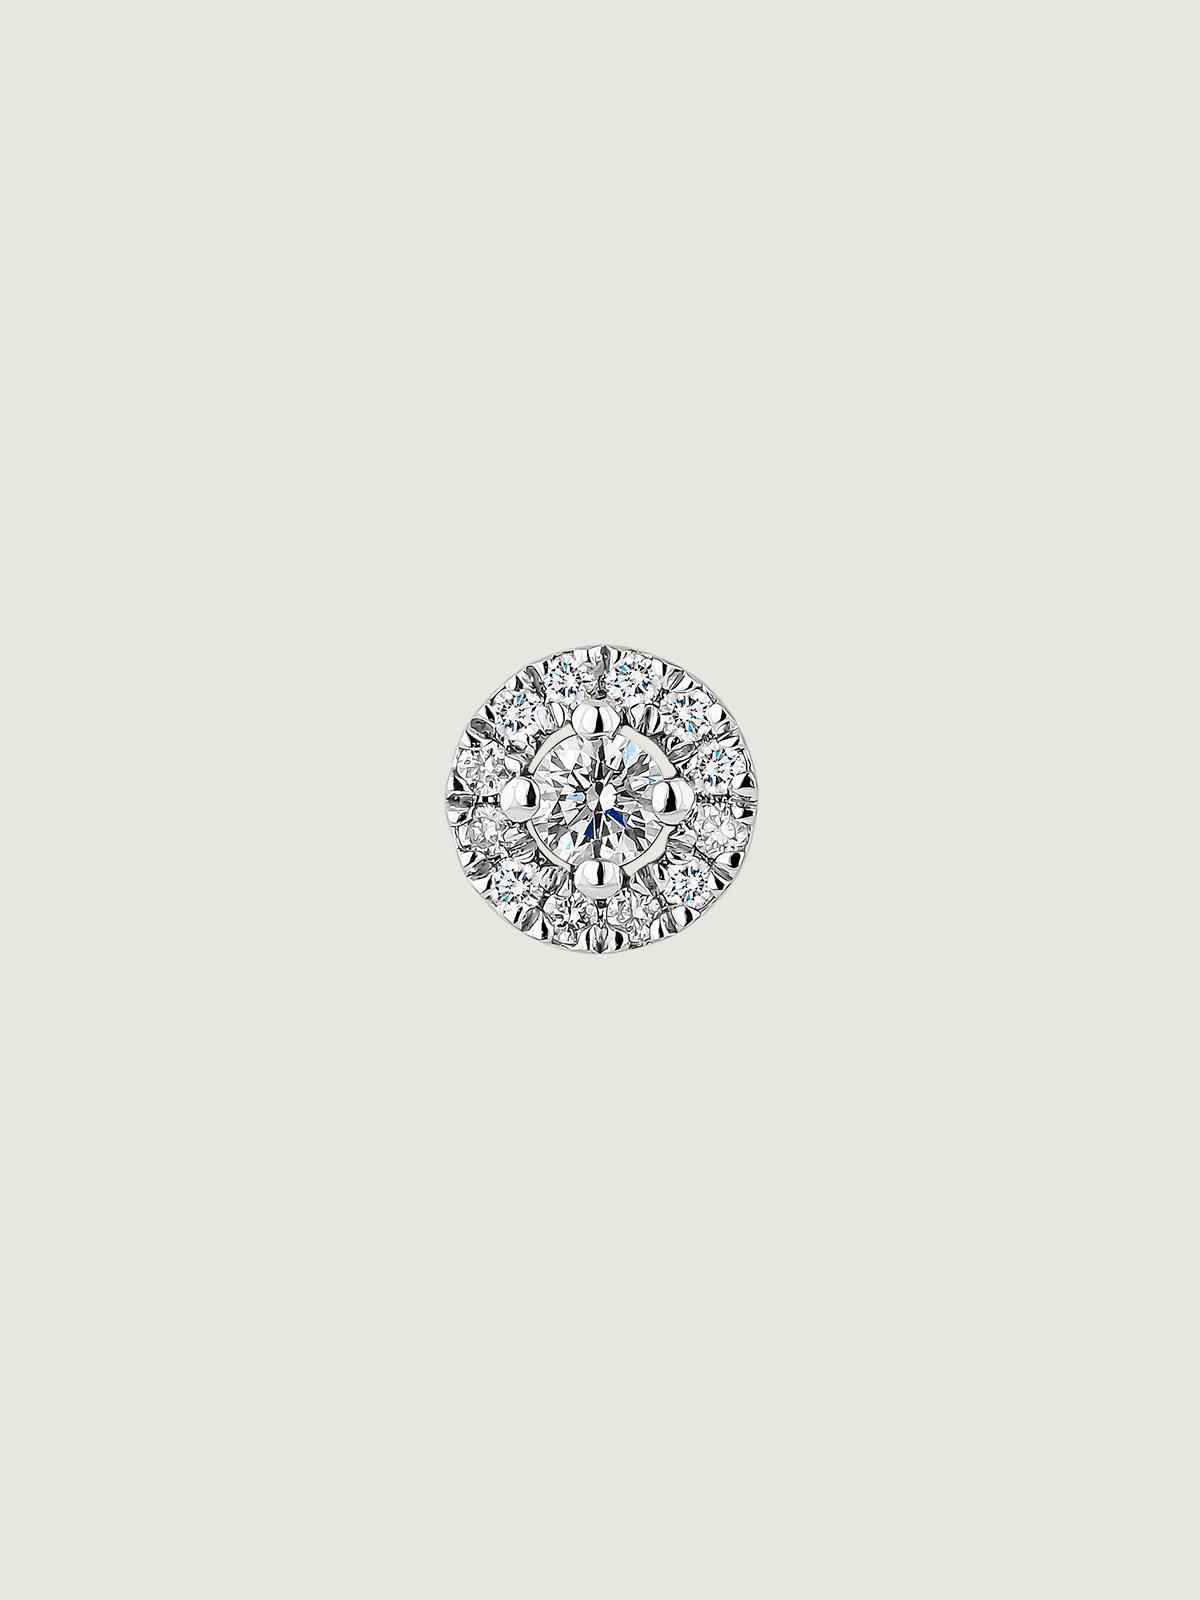 Individual 18K white gold earring with a 0.1 cts diamond rosette.